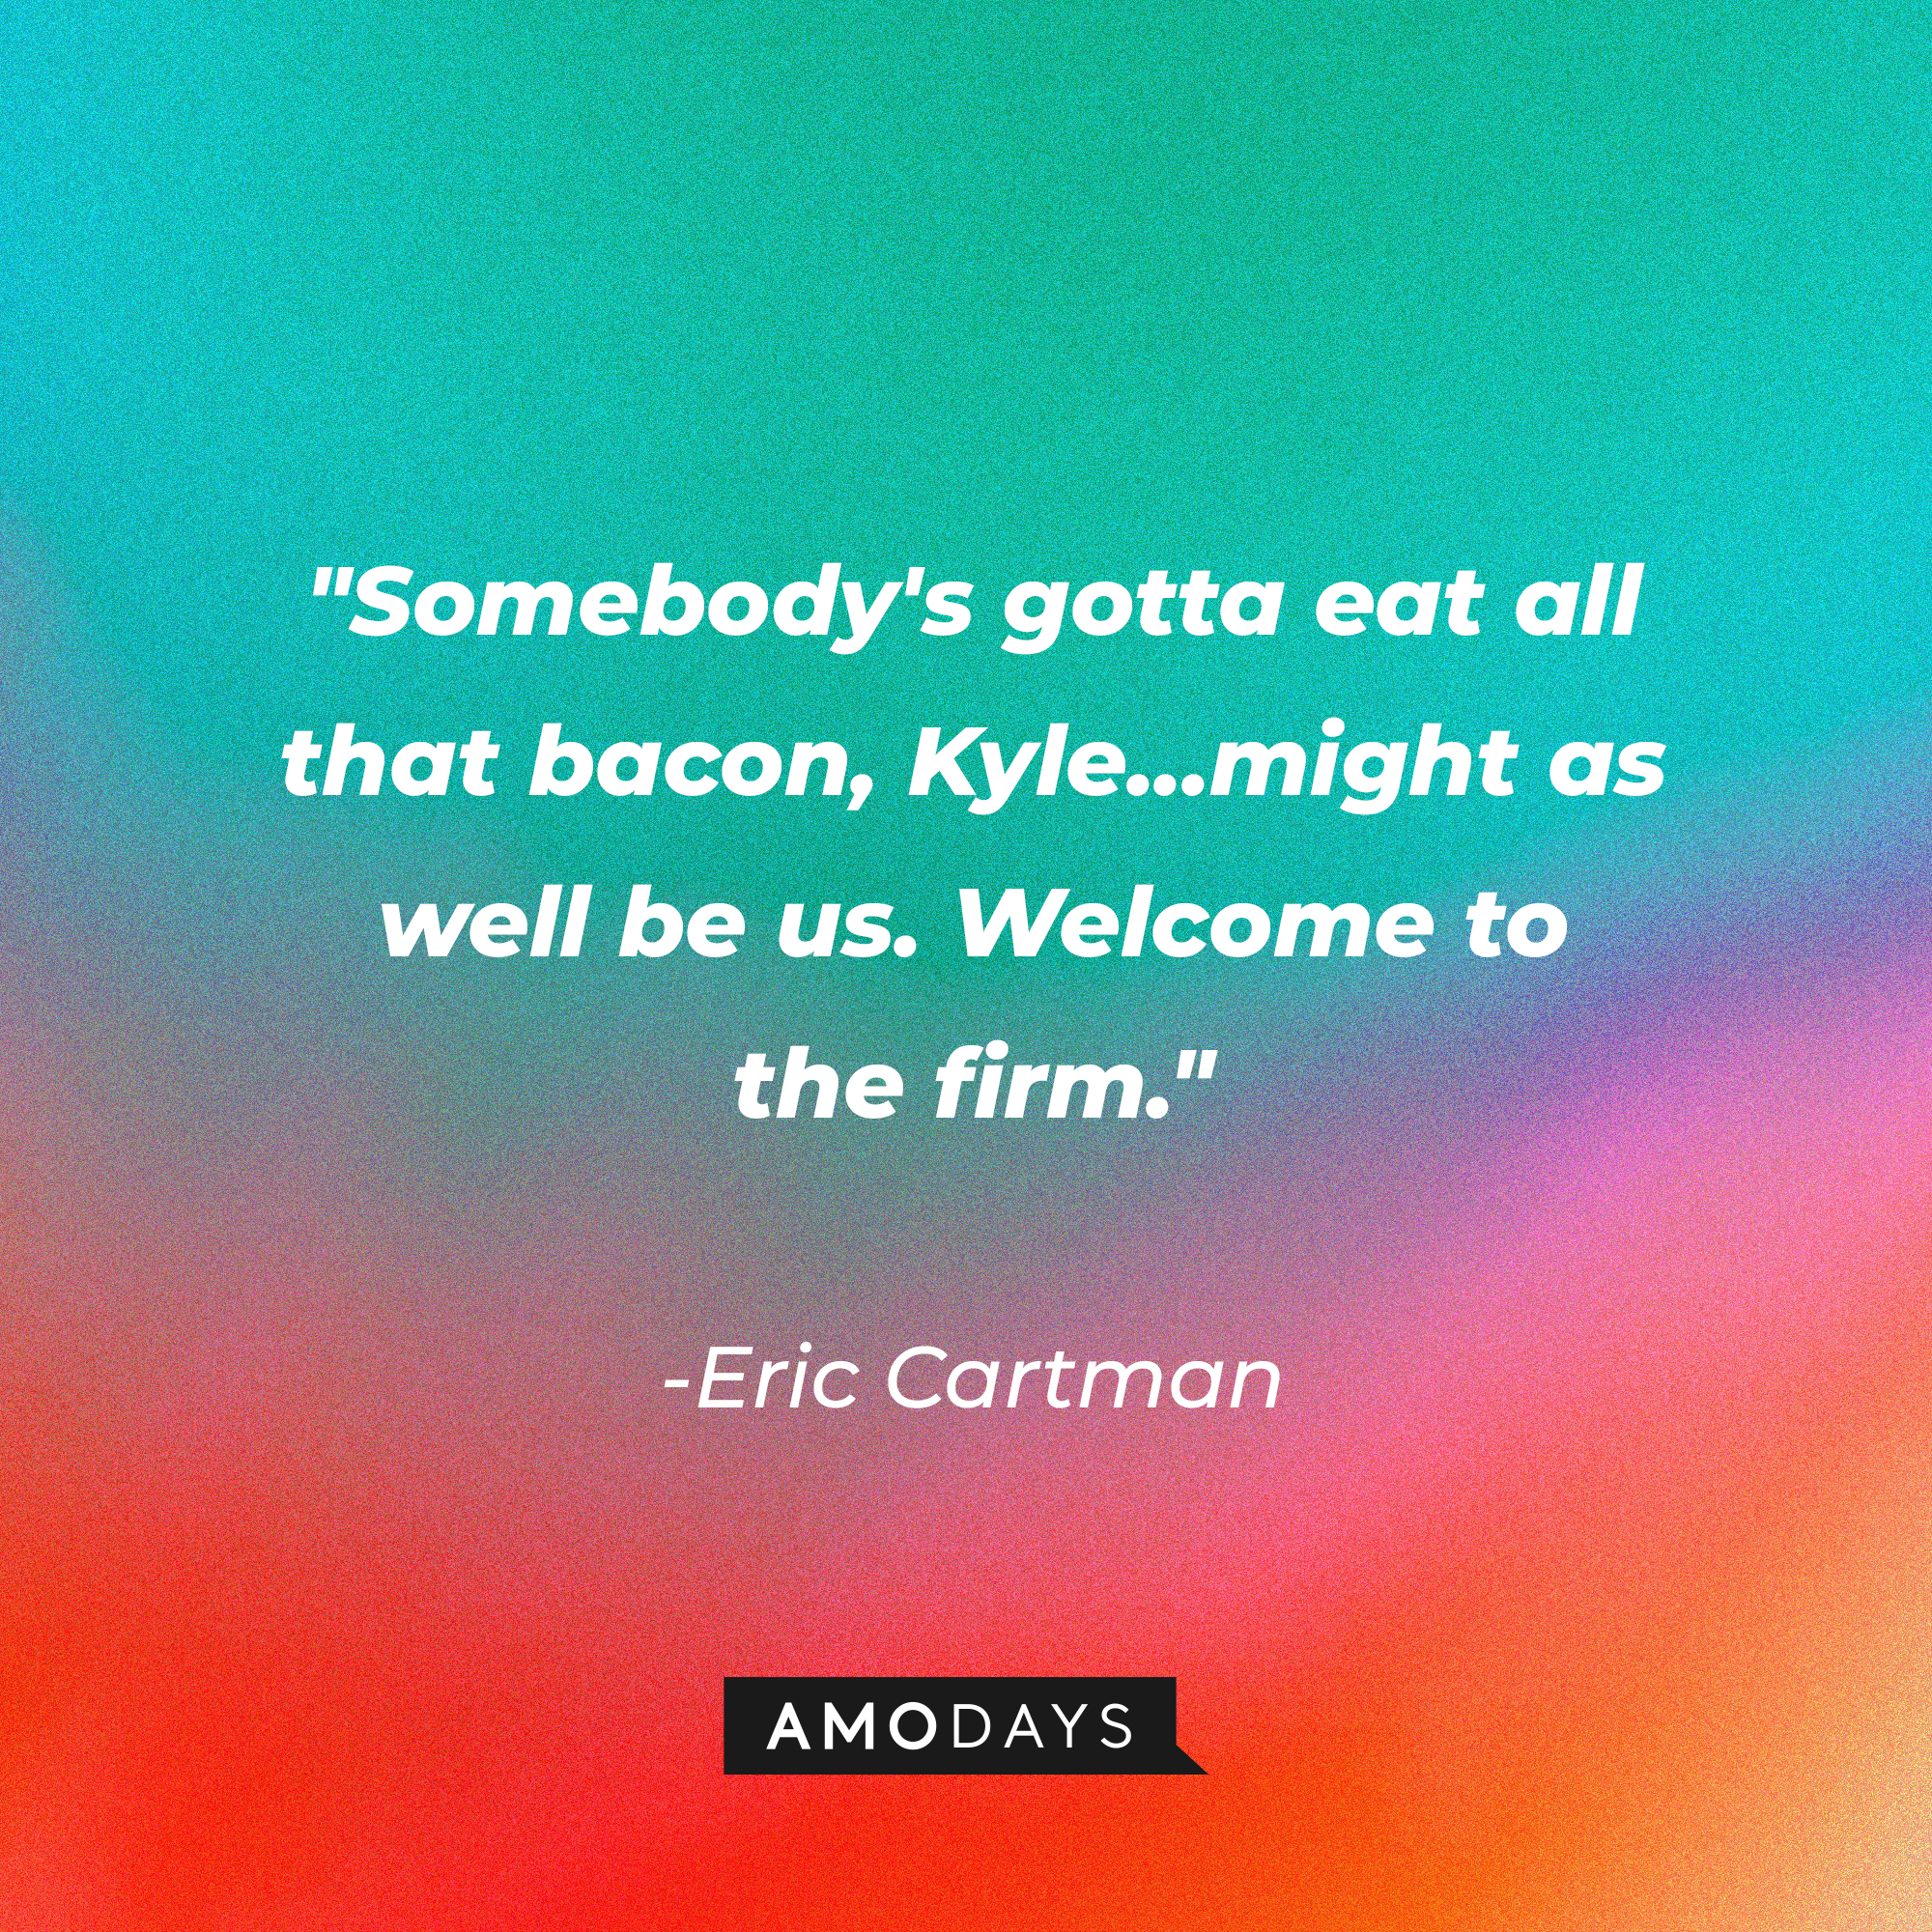 Eric Cartman's quote: "Somebody's gotta eat all that bacon, Kyle...might as well be us. Welcome to the firm." | Source: AmoDays